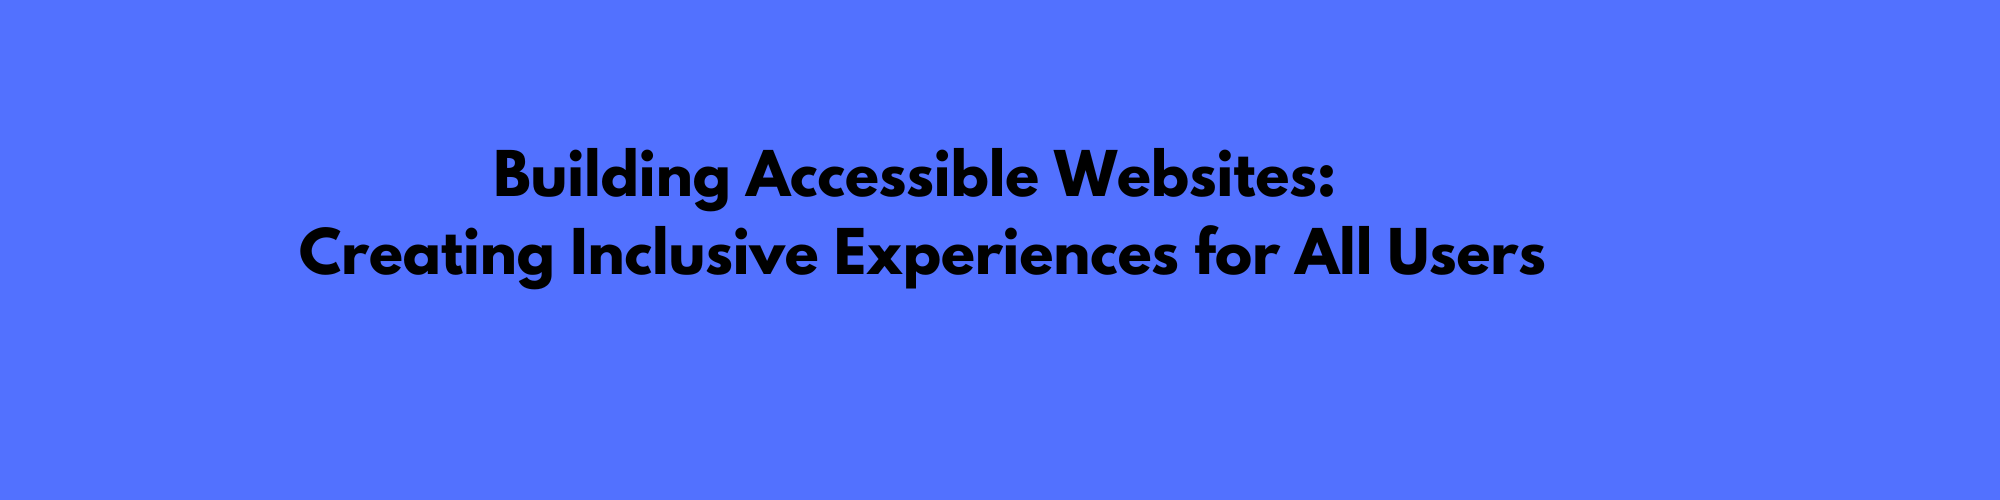 Building Accessible Websites: Creating Inclusive Experiences for All Users